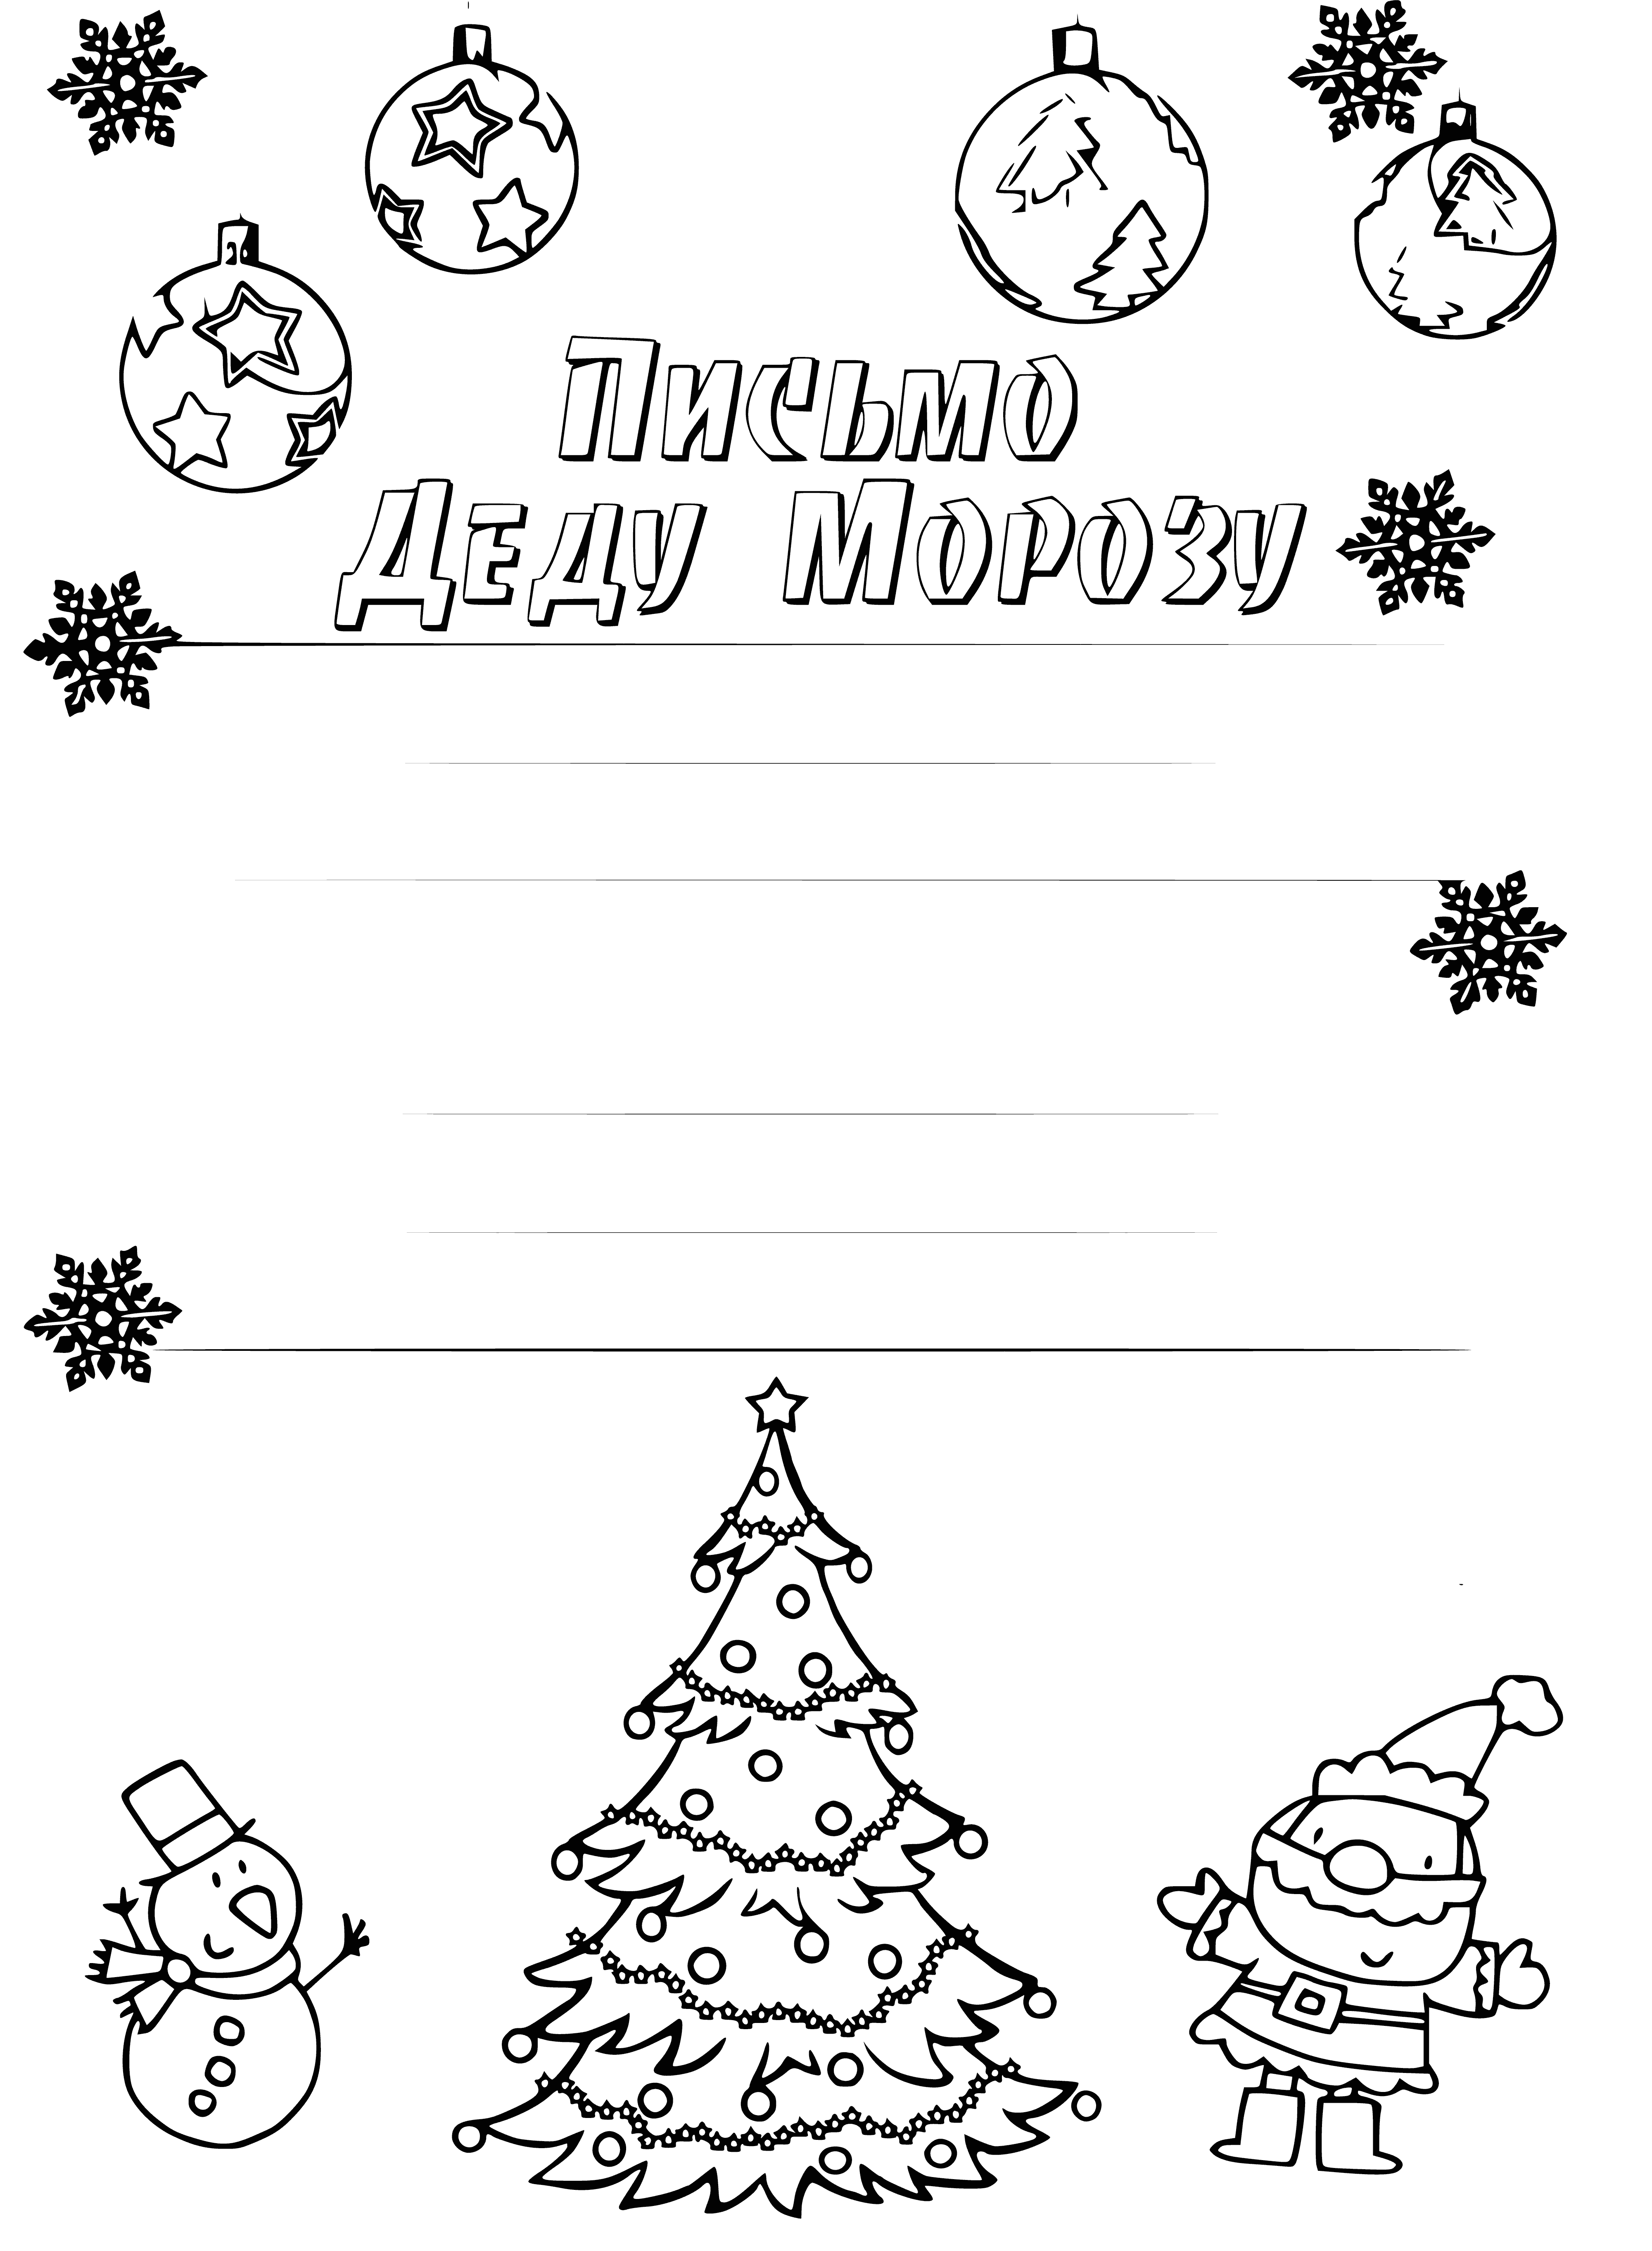 coloring page: Little girl writes Santa asking for a puppy for Christmas, promising to take care of it. "Love, (name)." #ChristmasMiracle